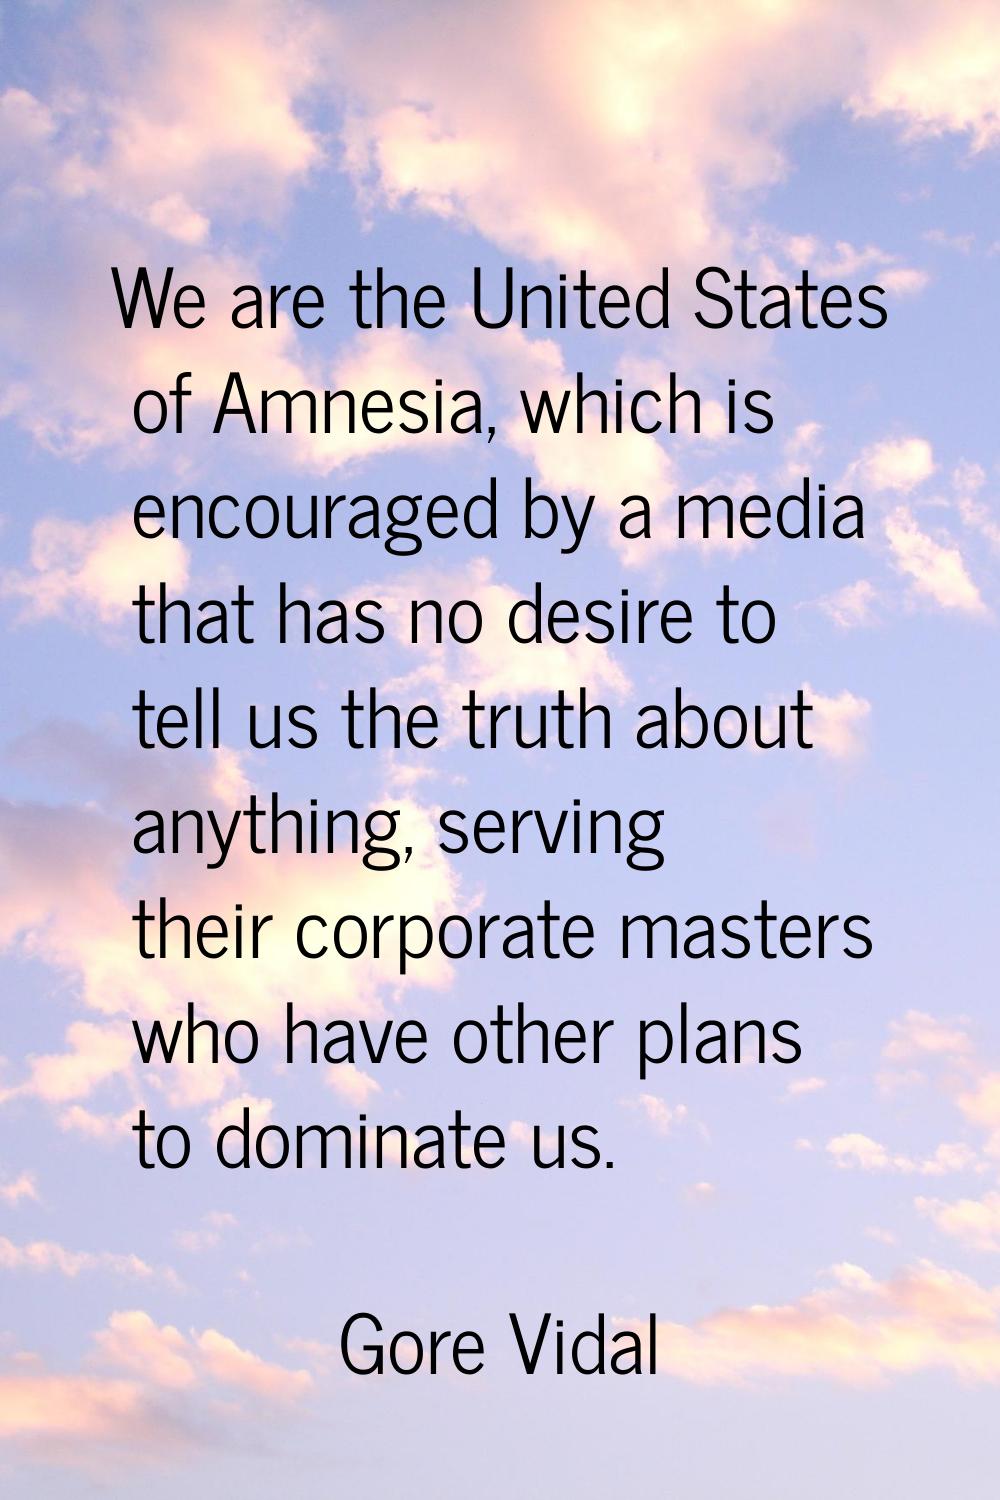 We are the United States of Amnesia, which is encouraged by a media that has no desire to tell us t